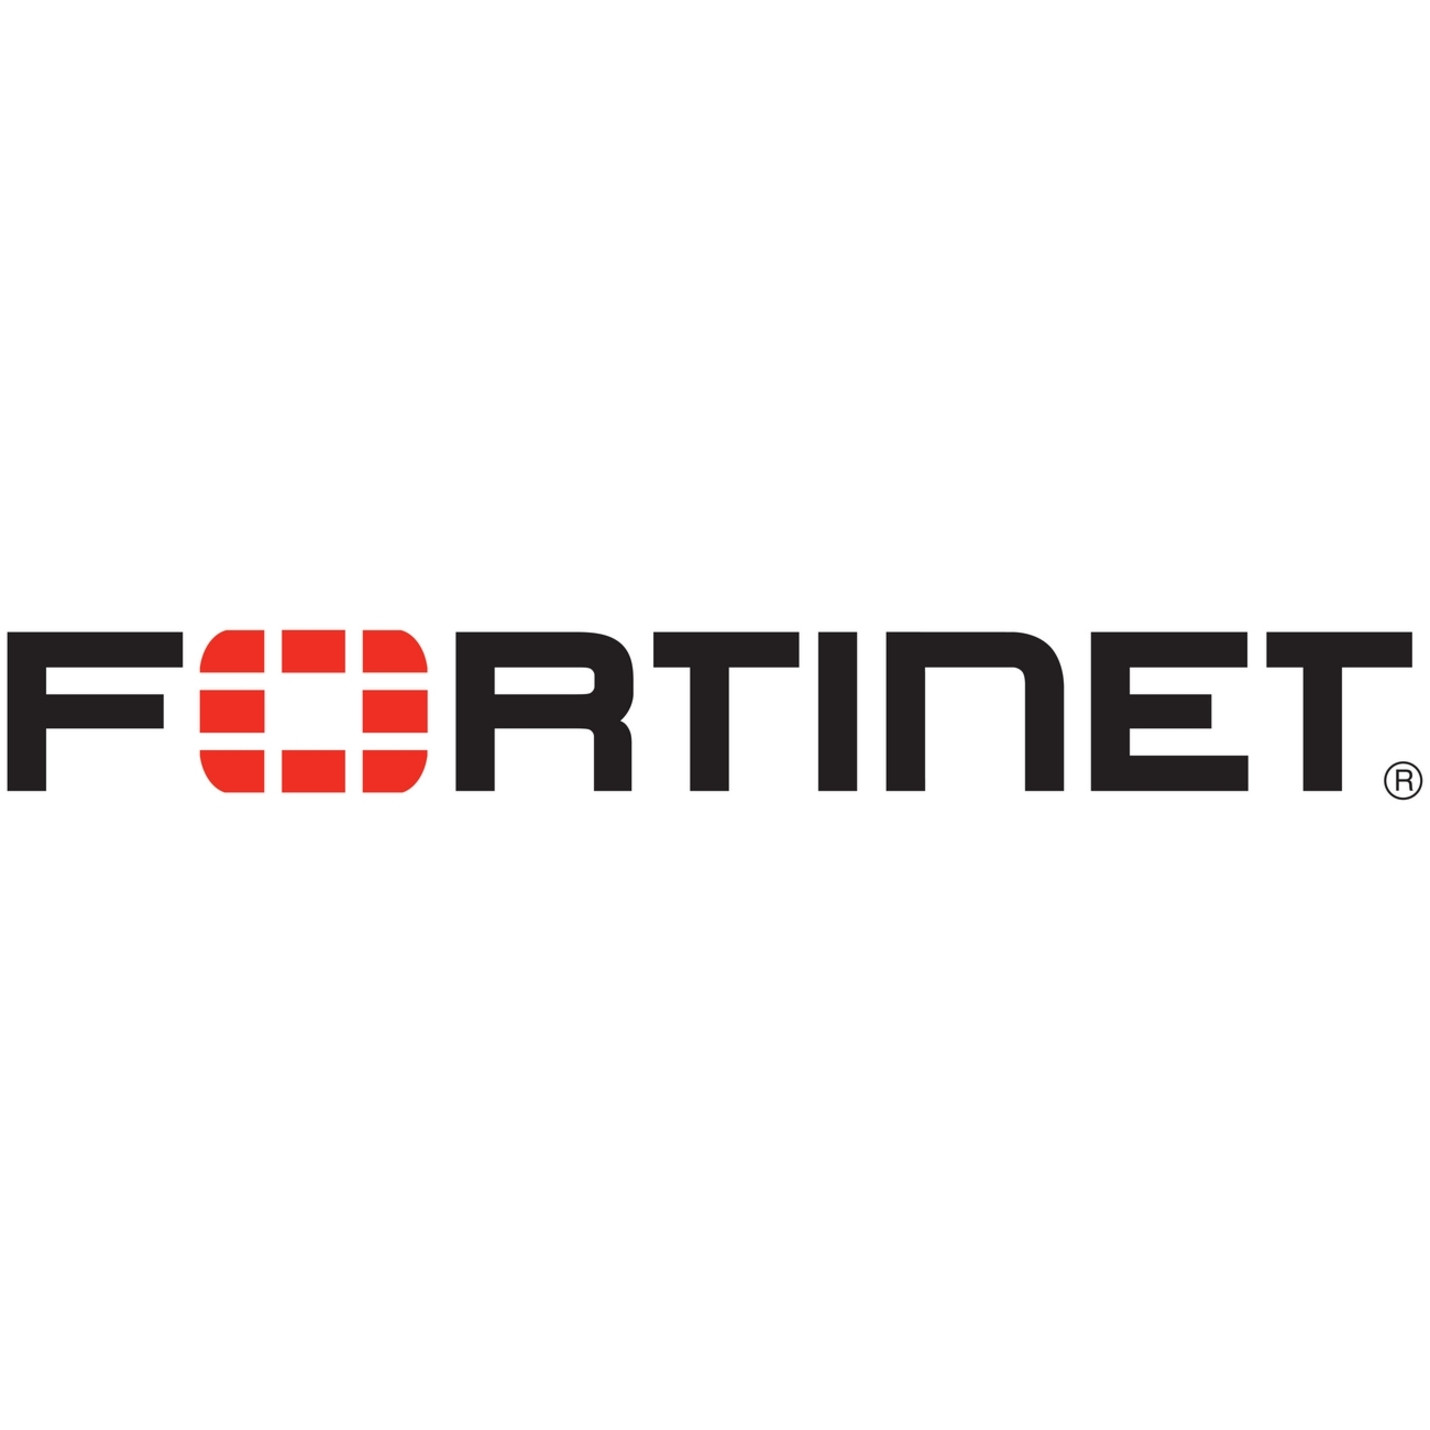 Fortinet Mounting Rail for Network Security & Firewall Device SP-FAZ3500E-RAIL